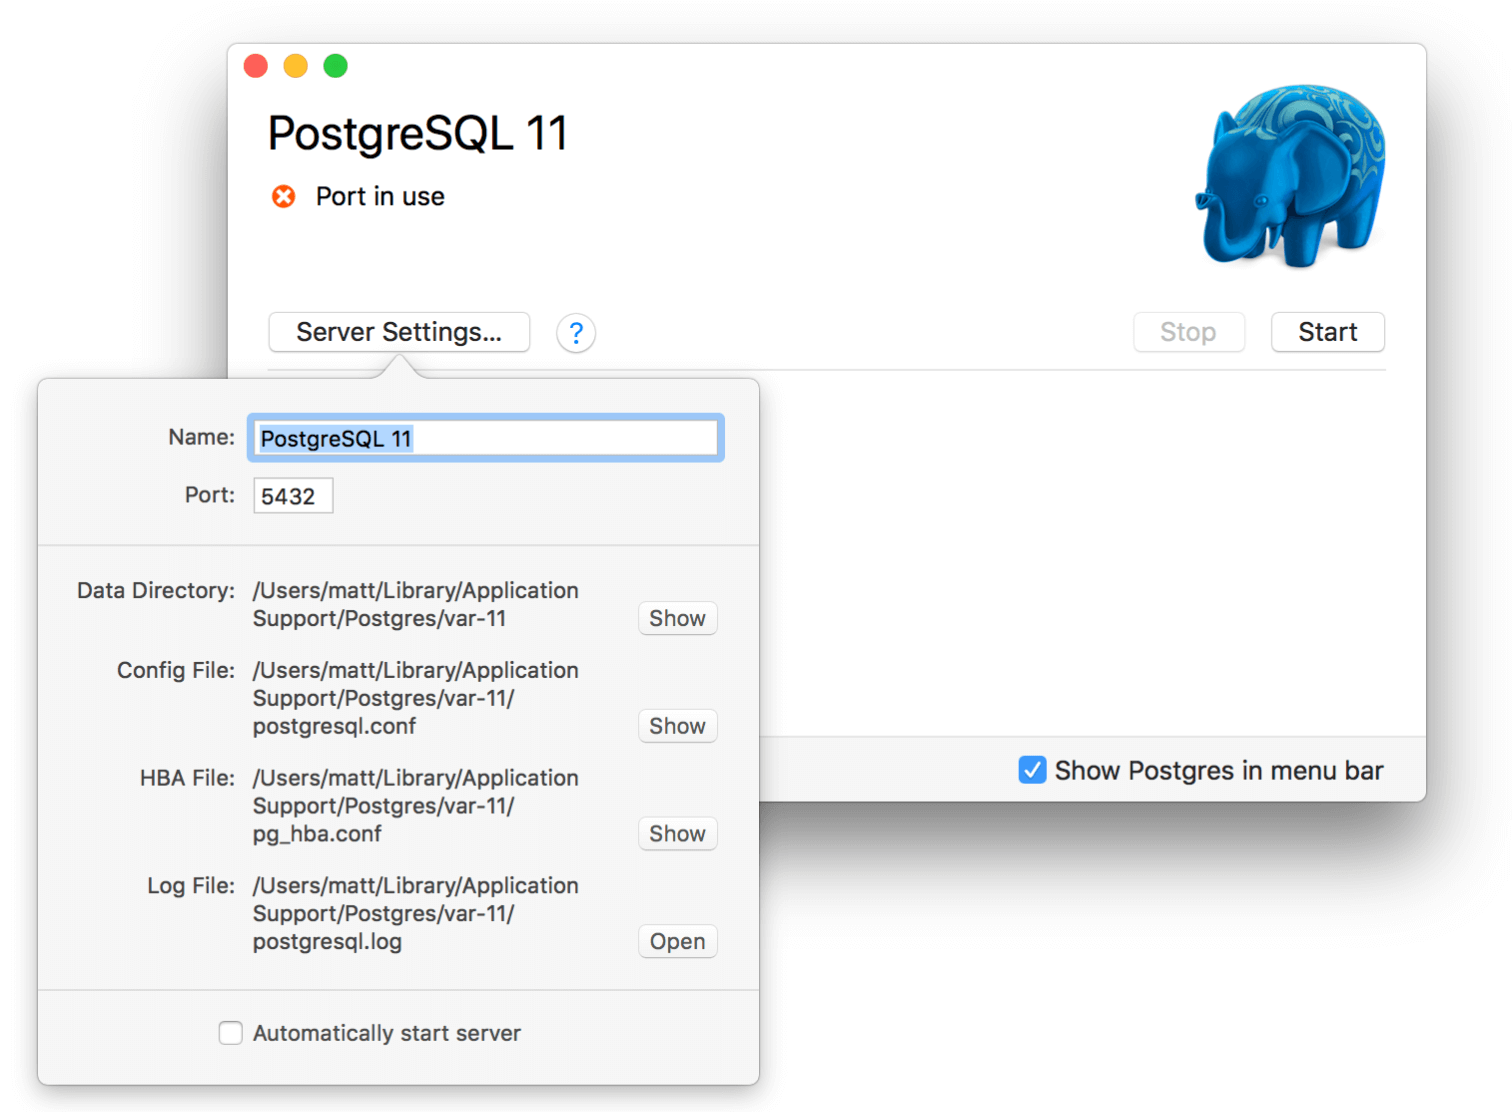 Shows how to edit settings in the postgres app